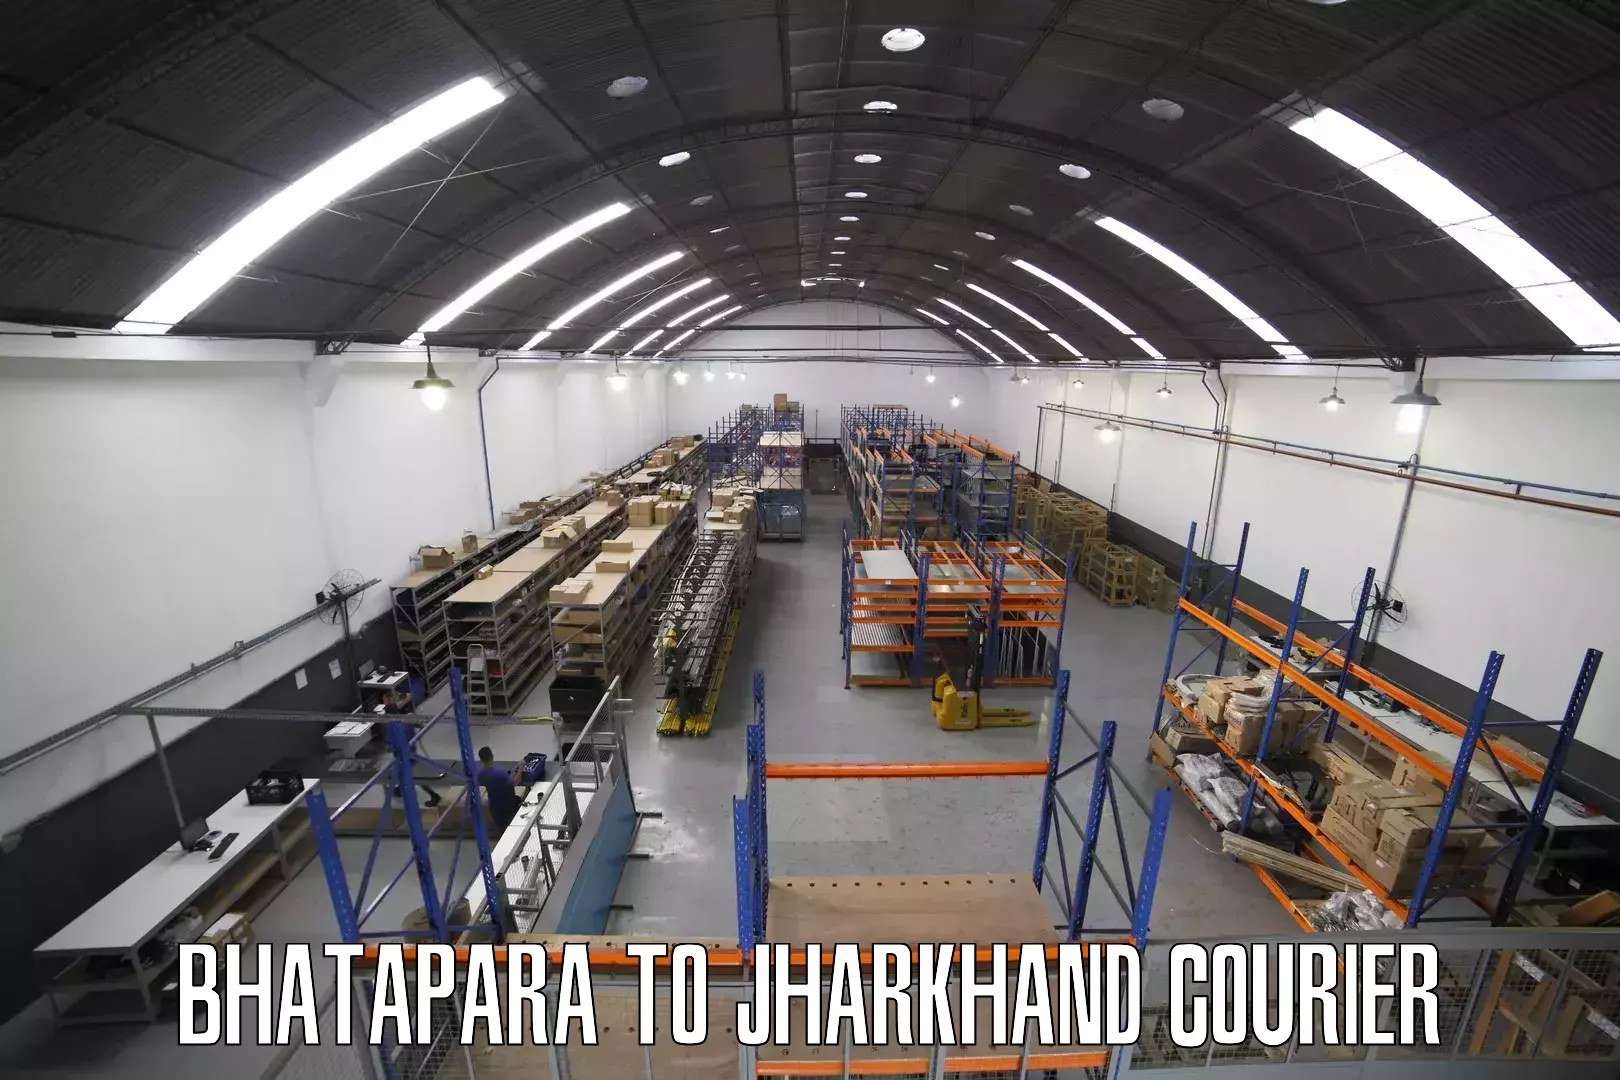 Automated parcel services Bhatapara to Barharwa